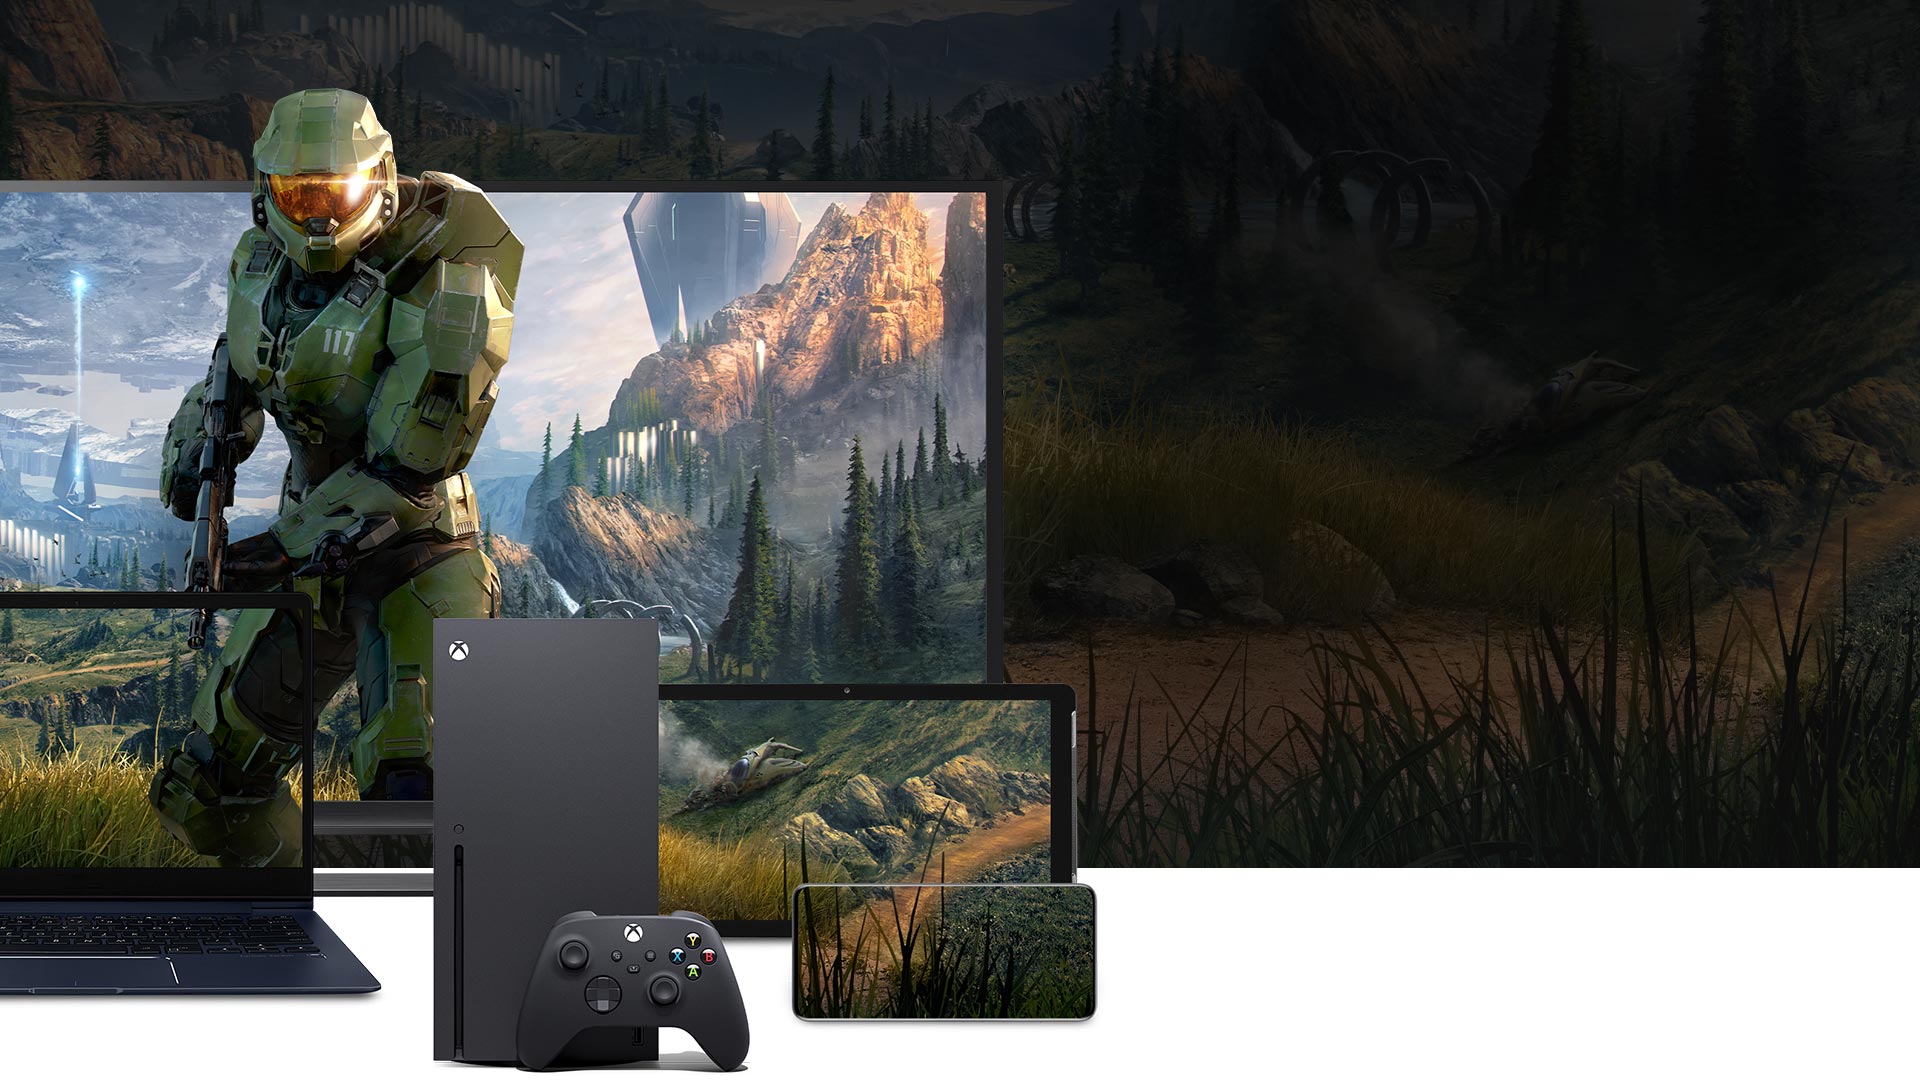 Xbox Series X console with a PC, tablet, and phone featuring Master Chief from Halo Infinite.